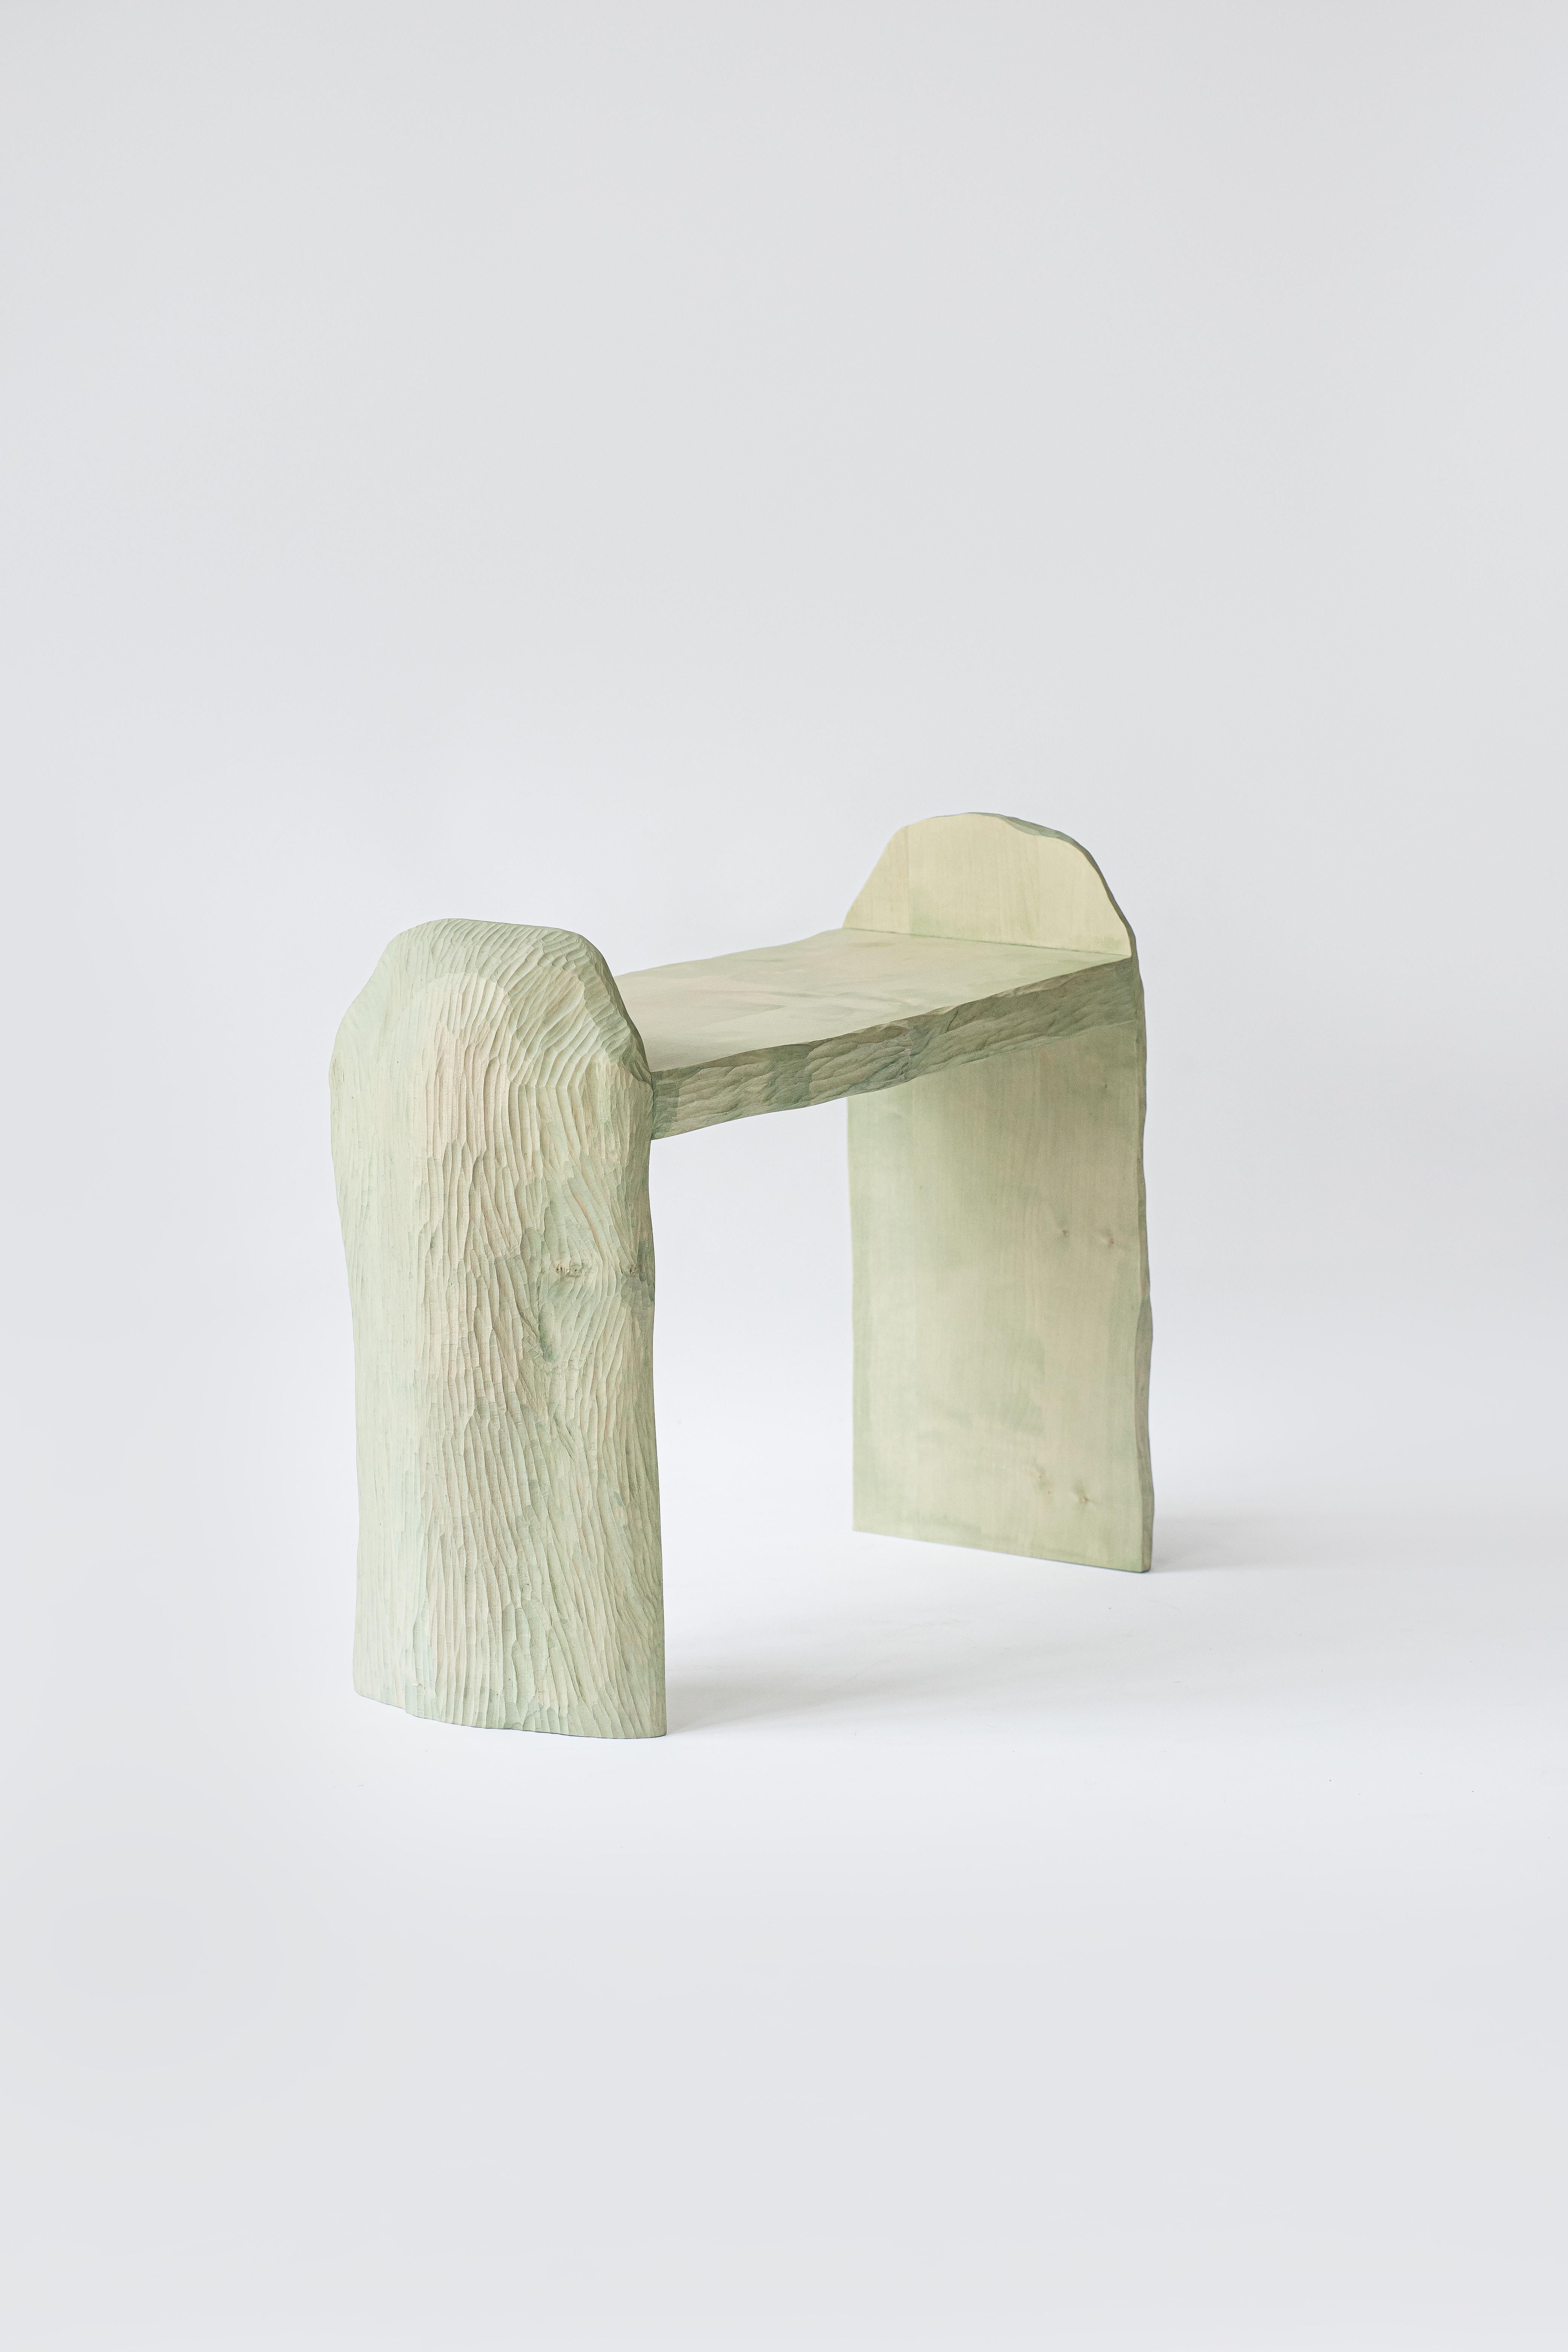 Wood Contemporary sculpted wood dyed INTUITIVE ARCHAISME bench by Cedric Breisacher For Sale